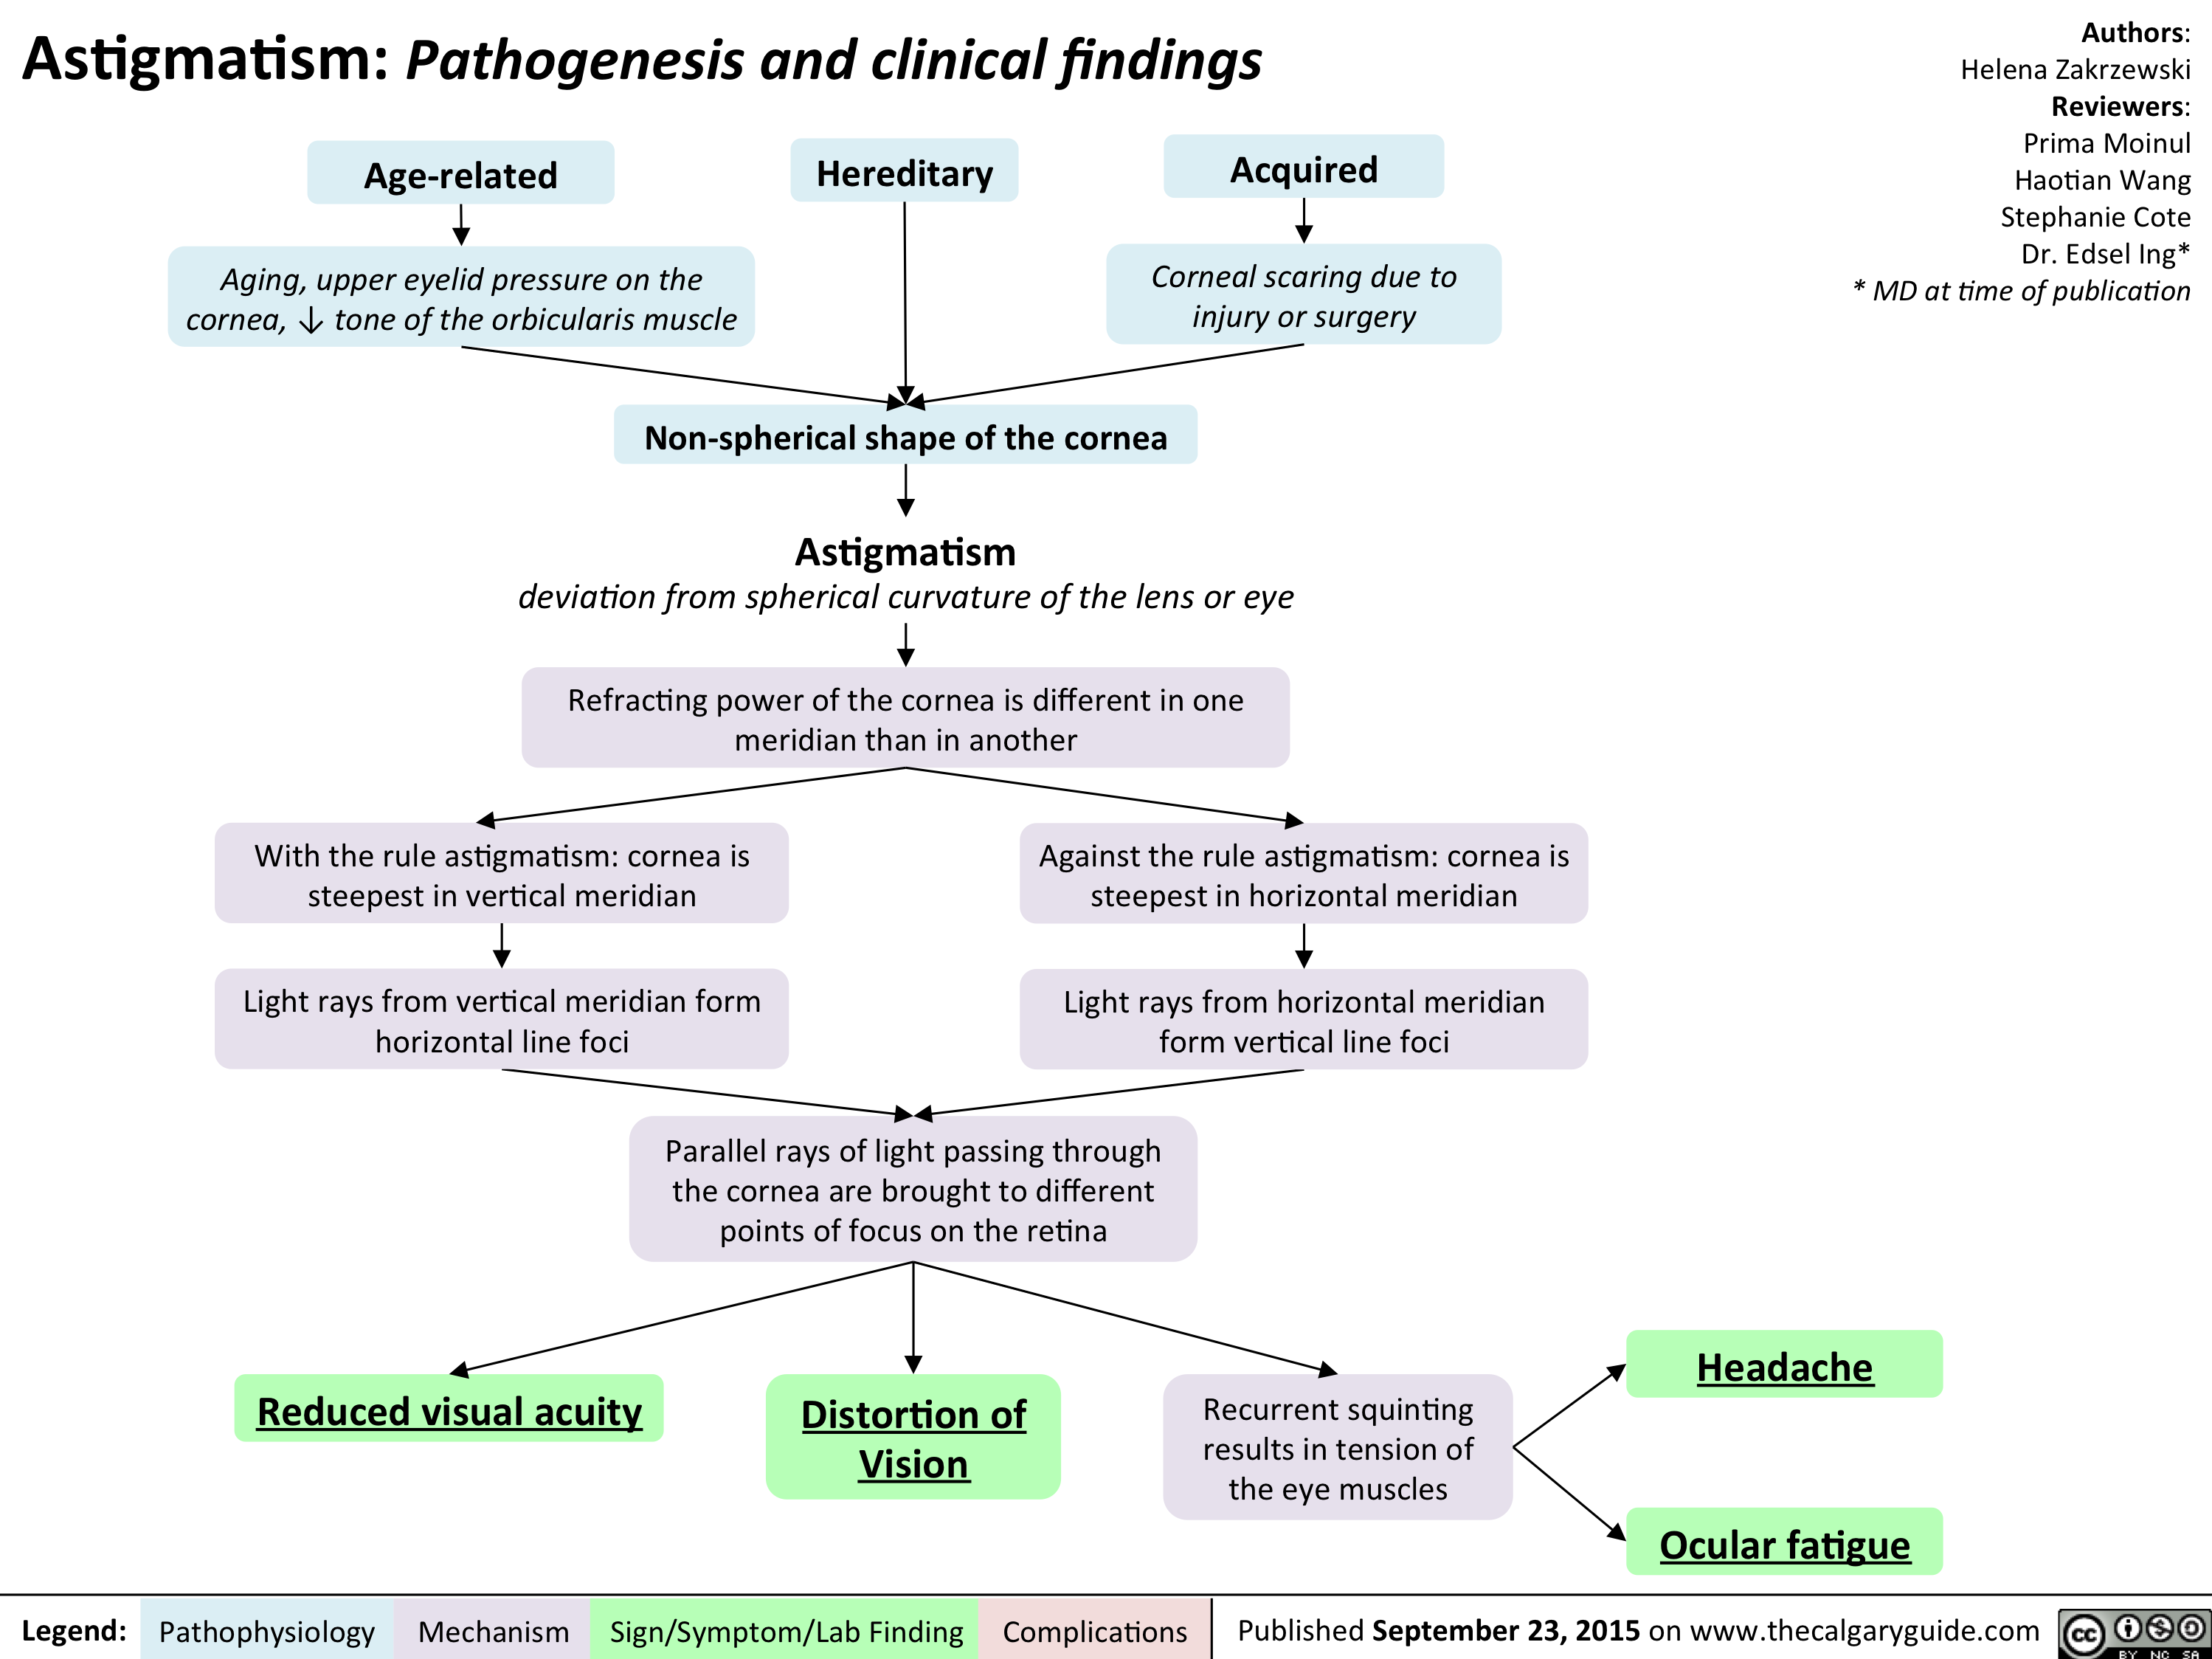 Astigmatism Pathogenesis and Clinical Findings